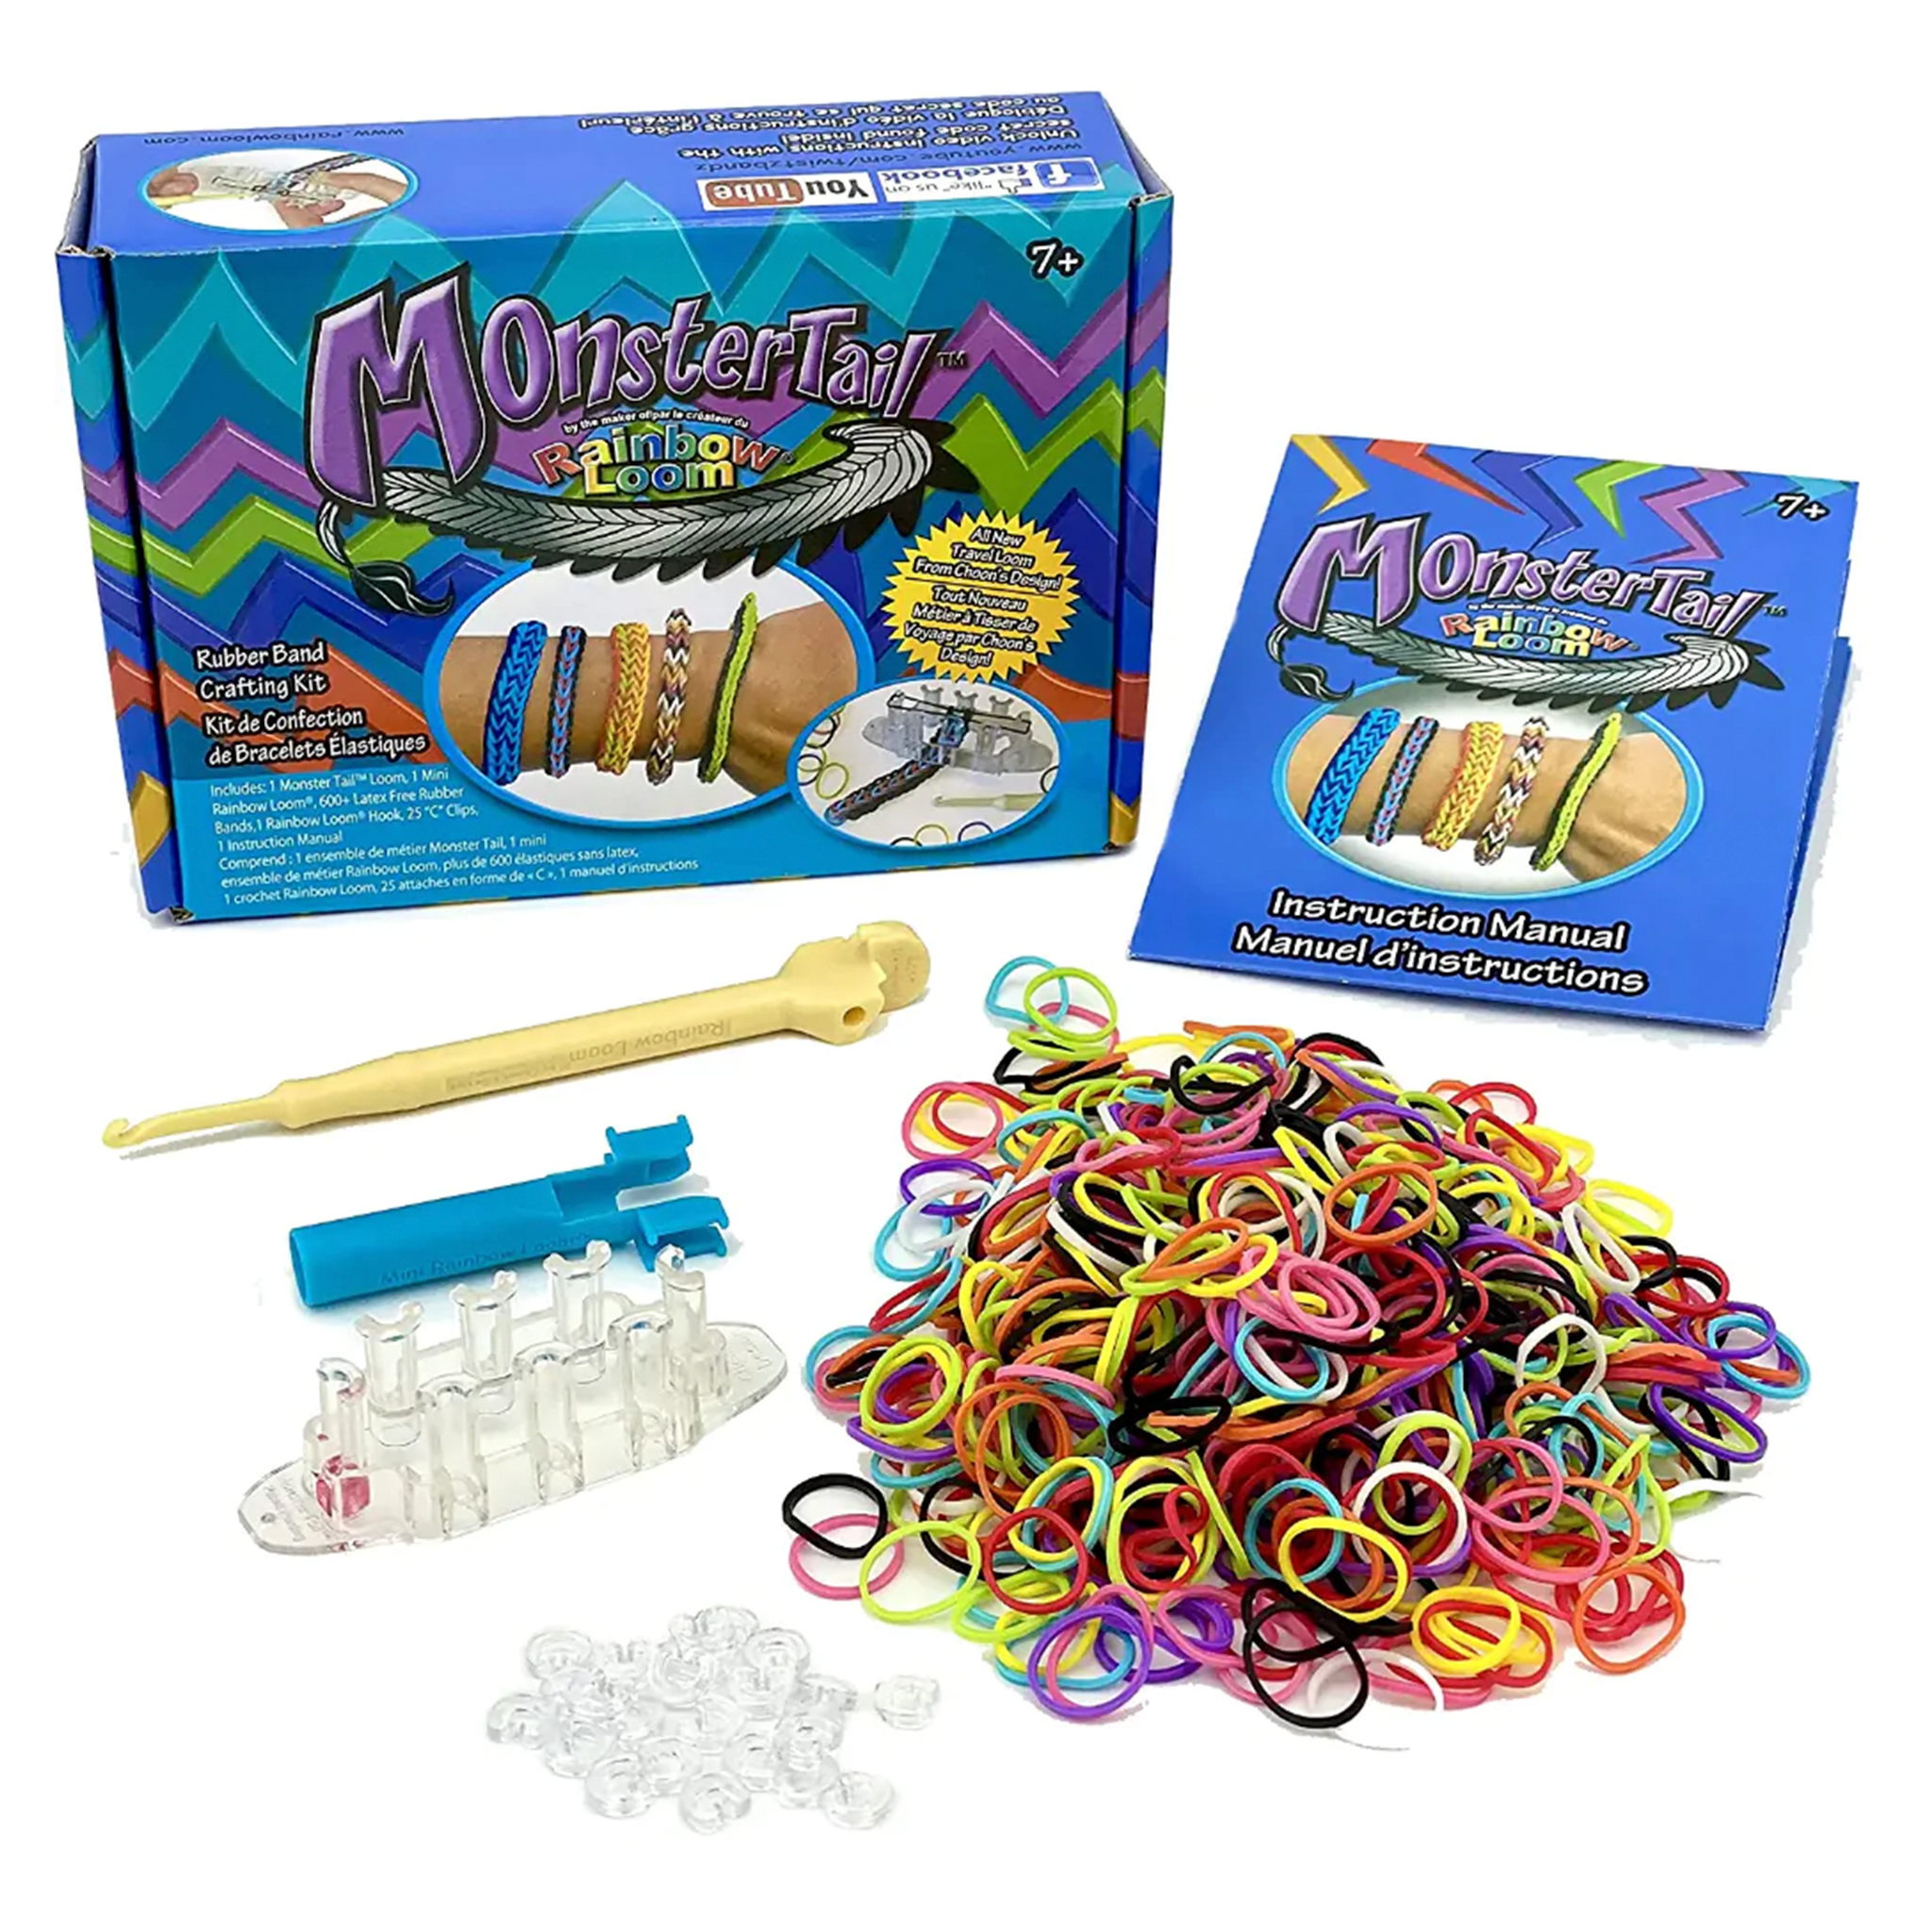 Rainbow Loom 2-in-1 Double Pack 